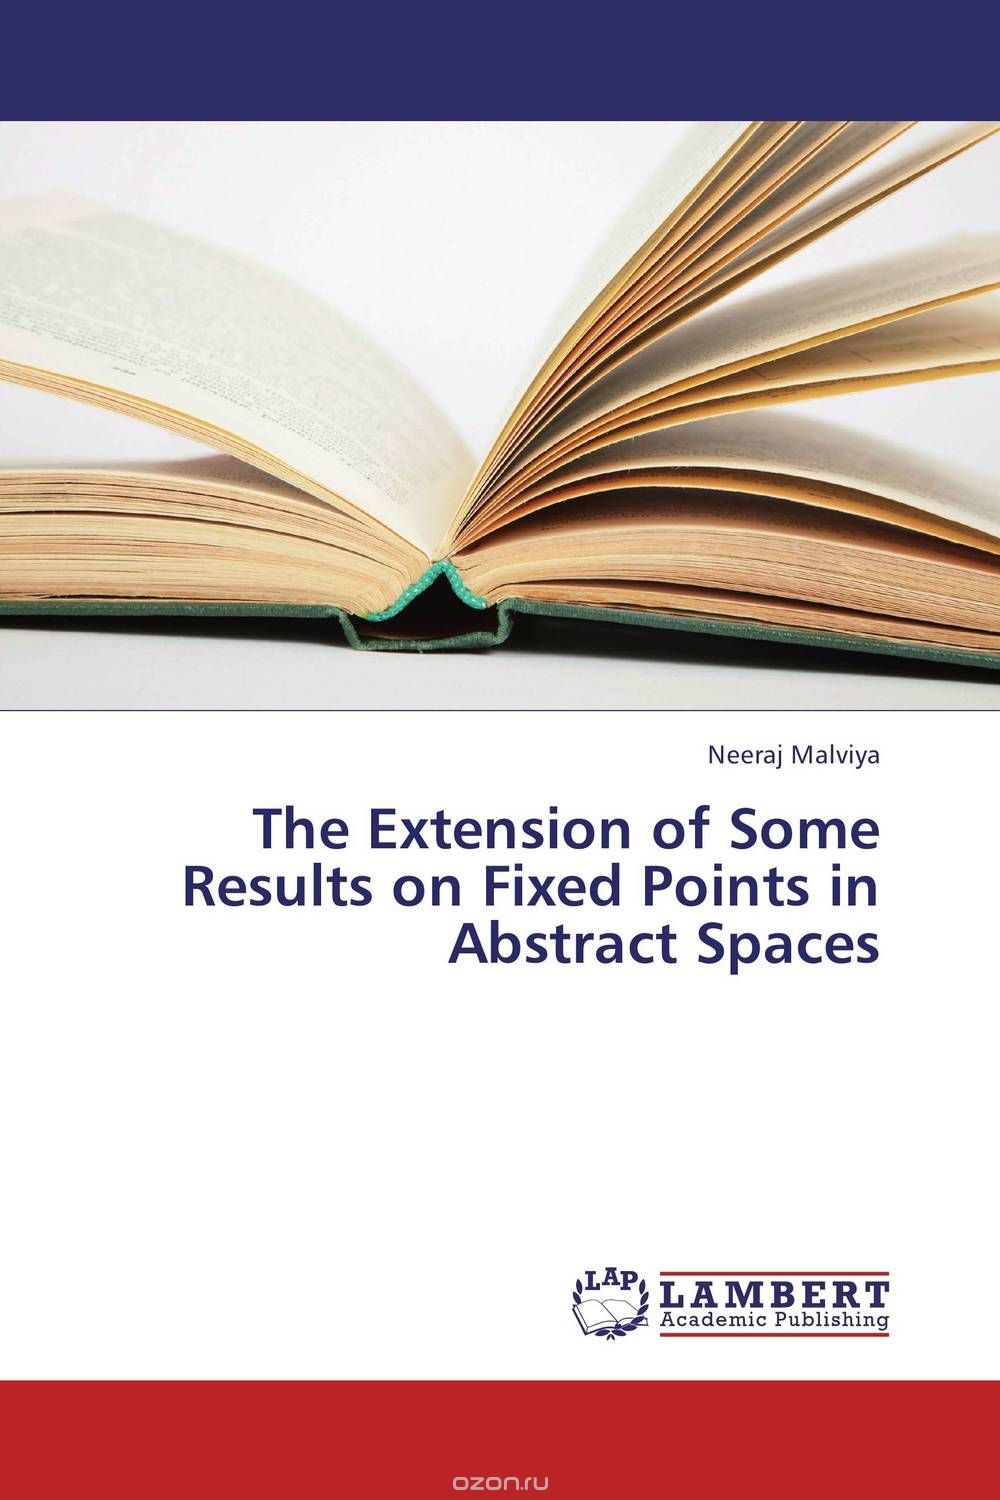 Скачать книгу "The Extension of Some Results on Fixed Points in Abstract Spaces"